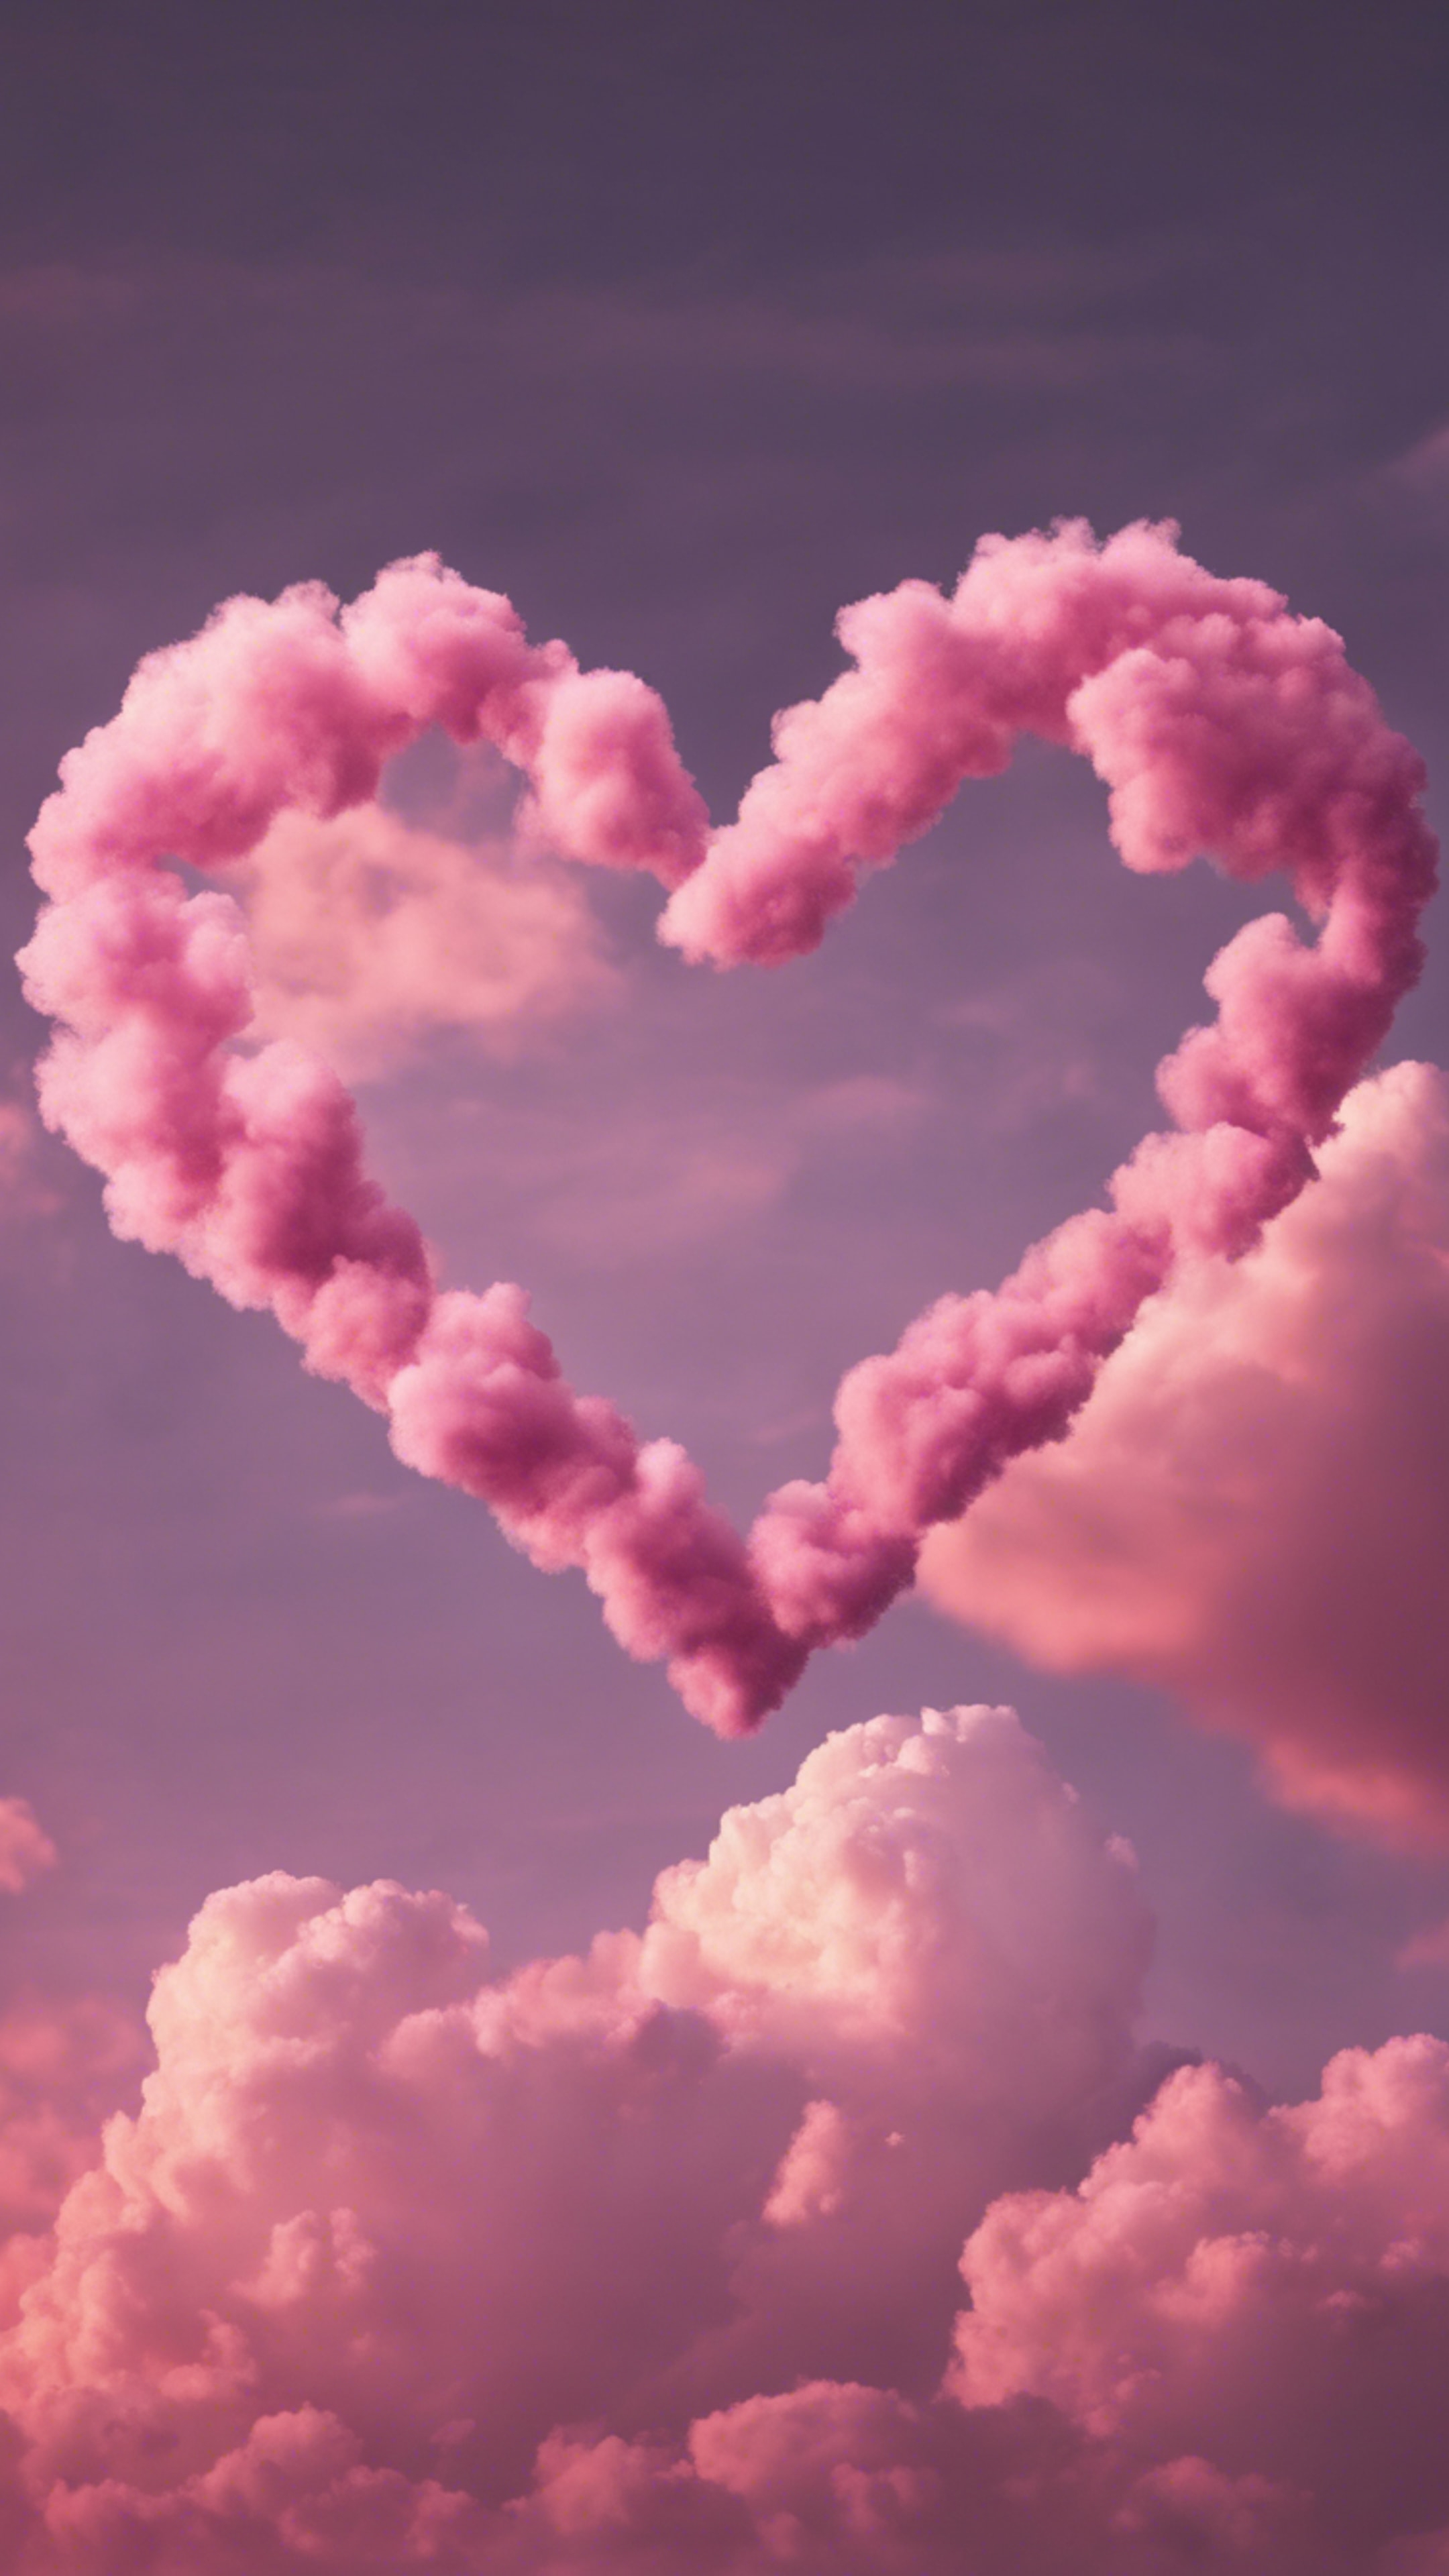 Pink heart-shaped clouds floating in the twilight sky. Tapet[eb6690dc48484c9aa4c9]